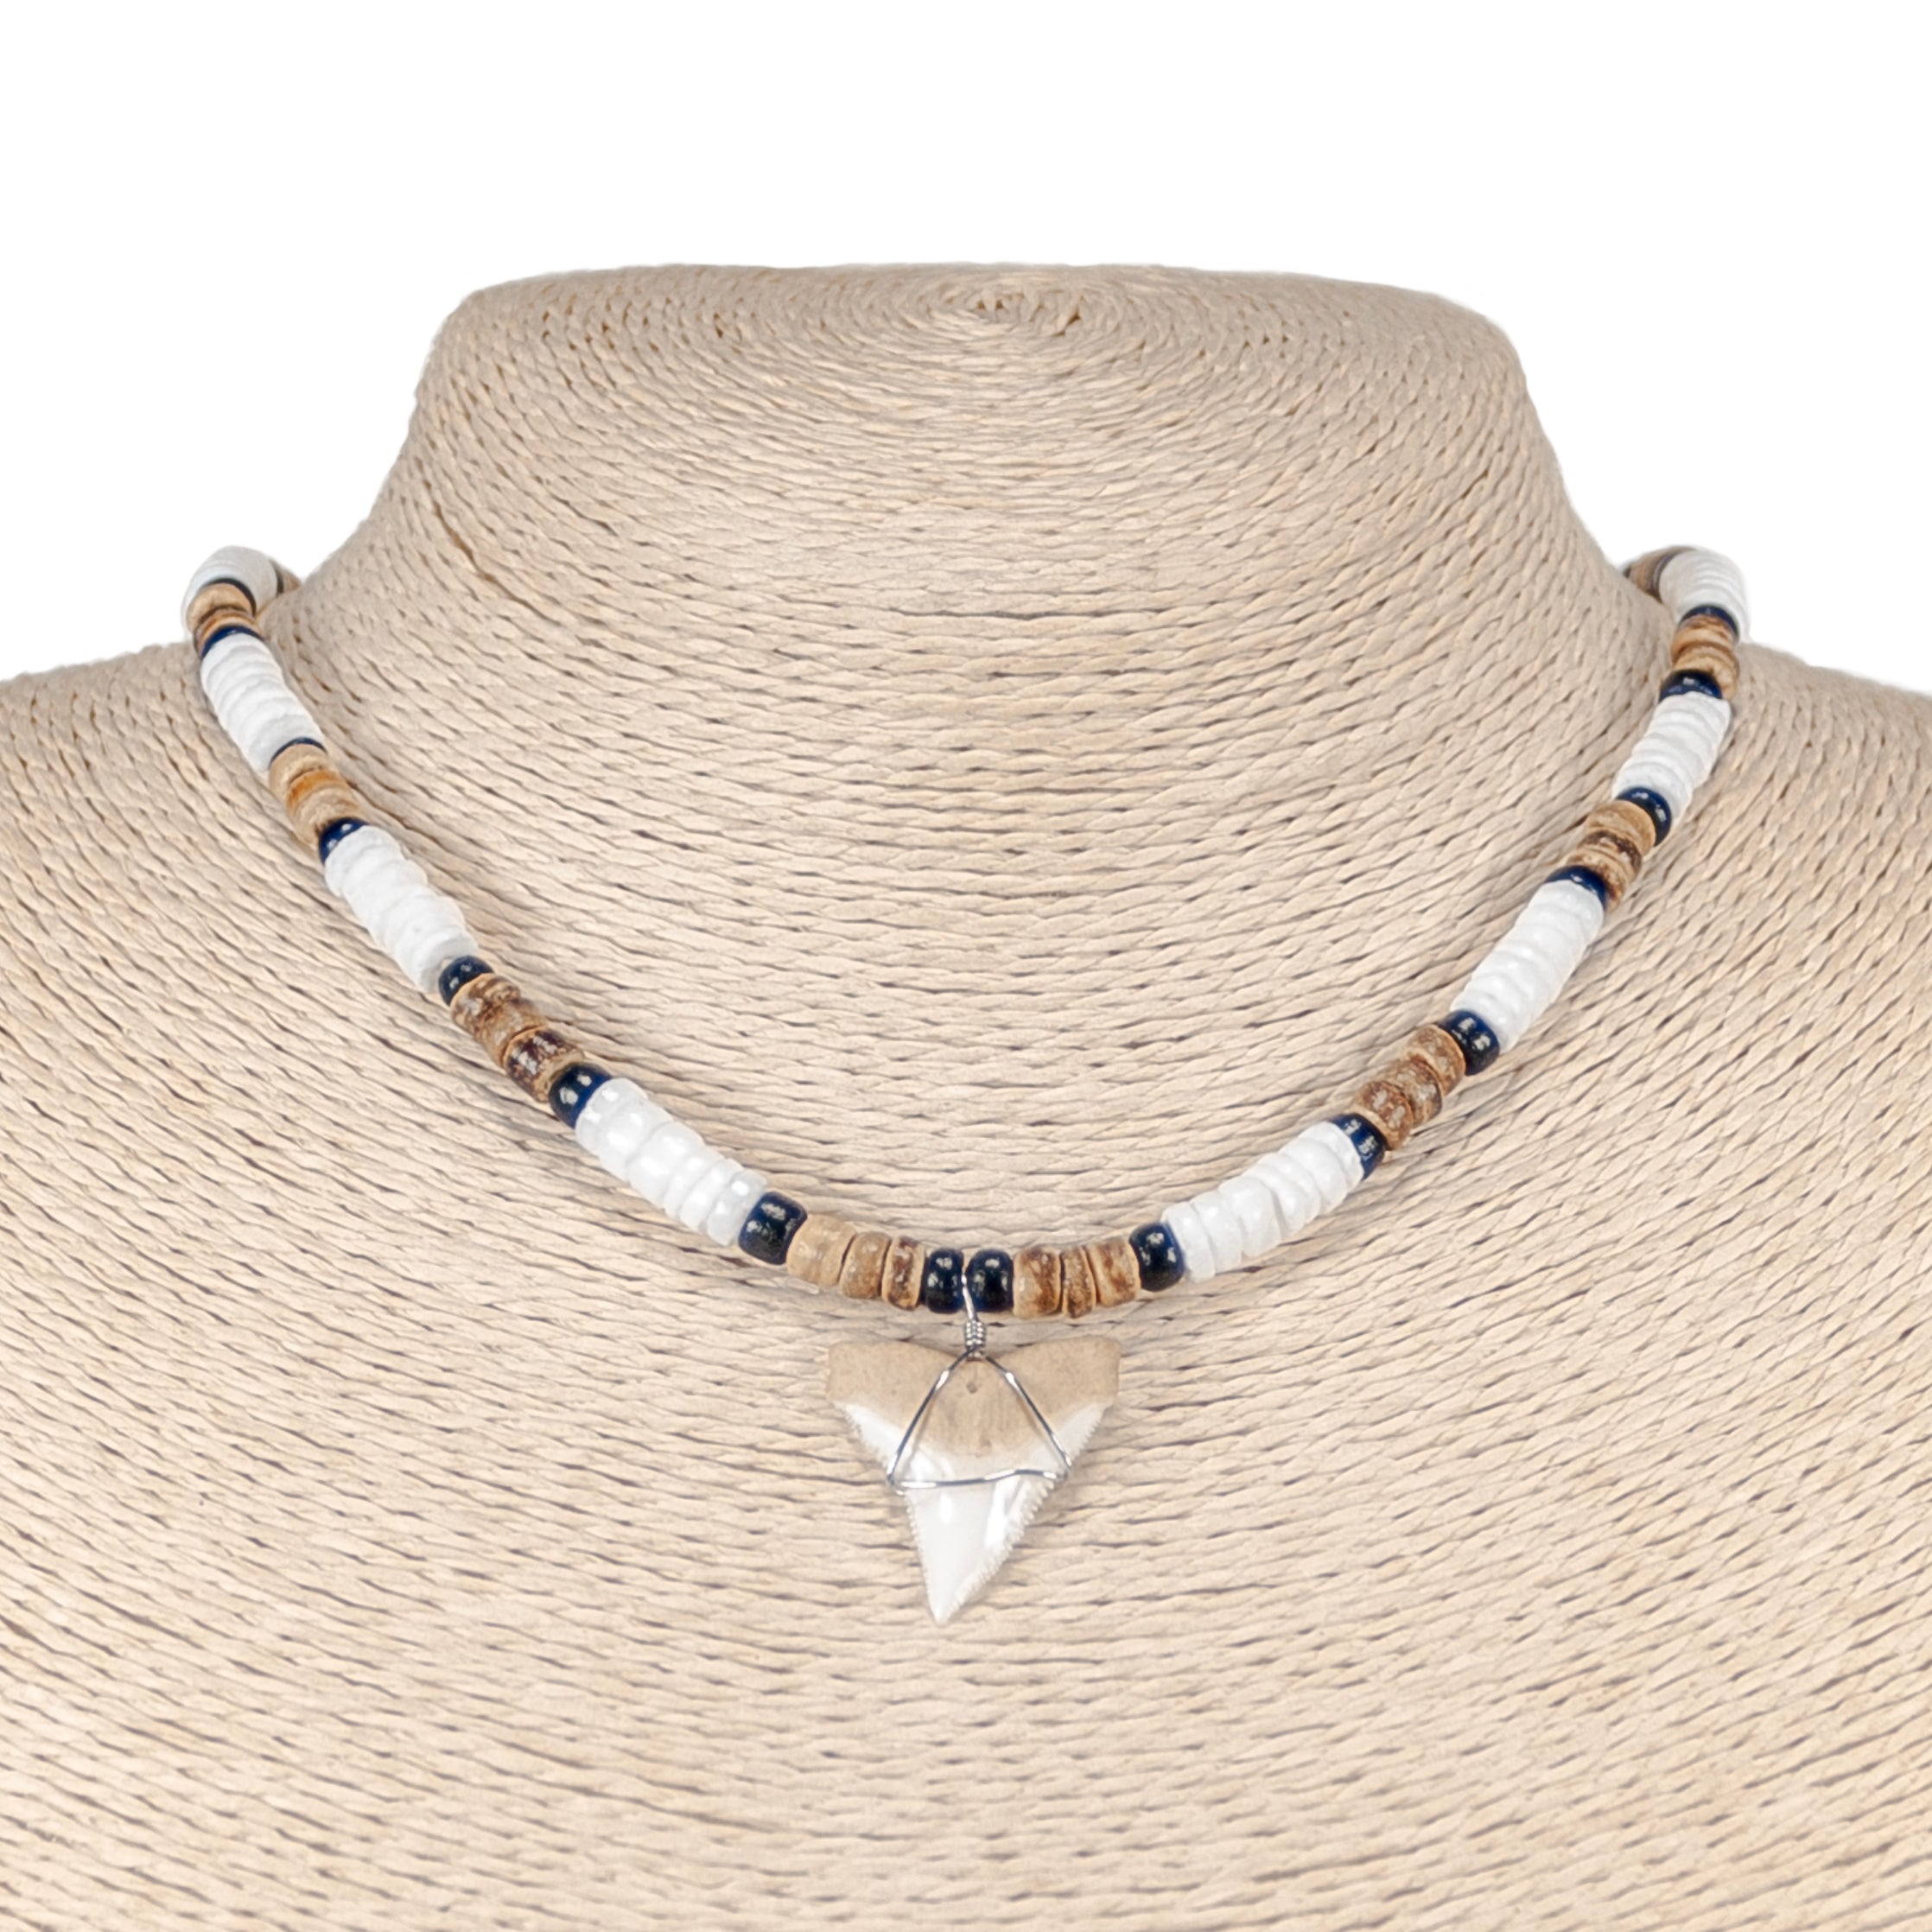 Bull Shark Tooth Pendant on Puka, Black and Tiger Coconut Beads Necklace